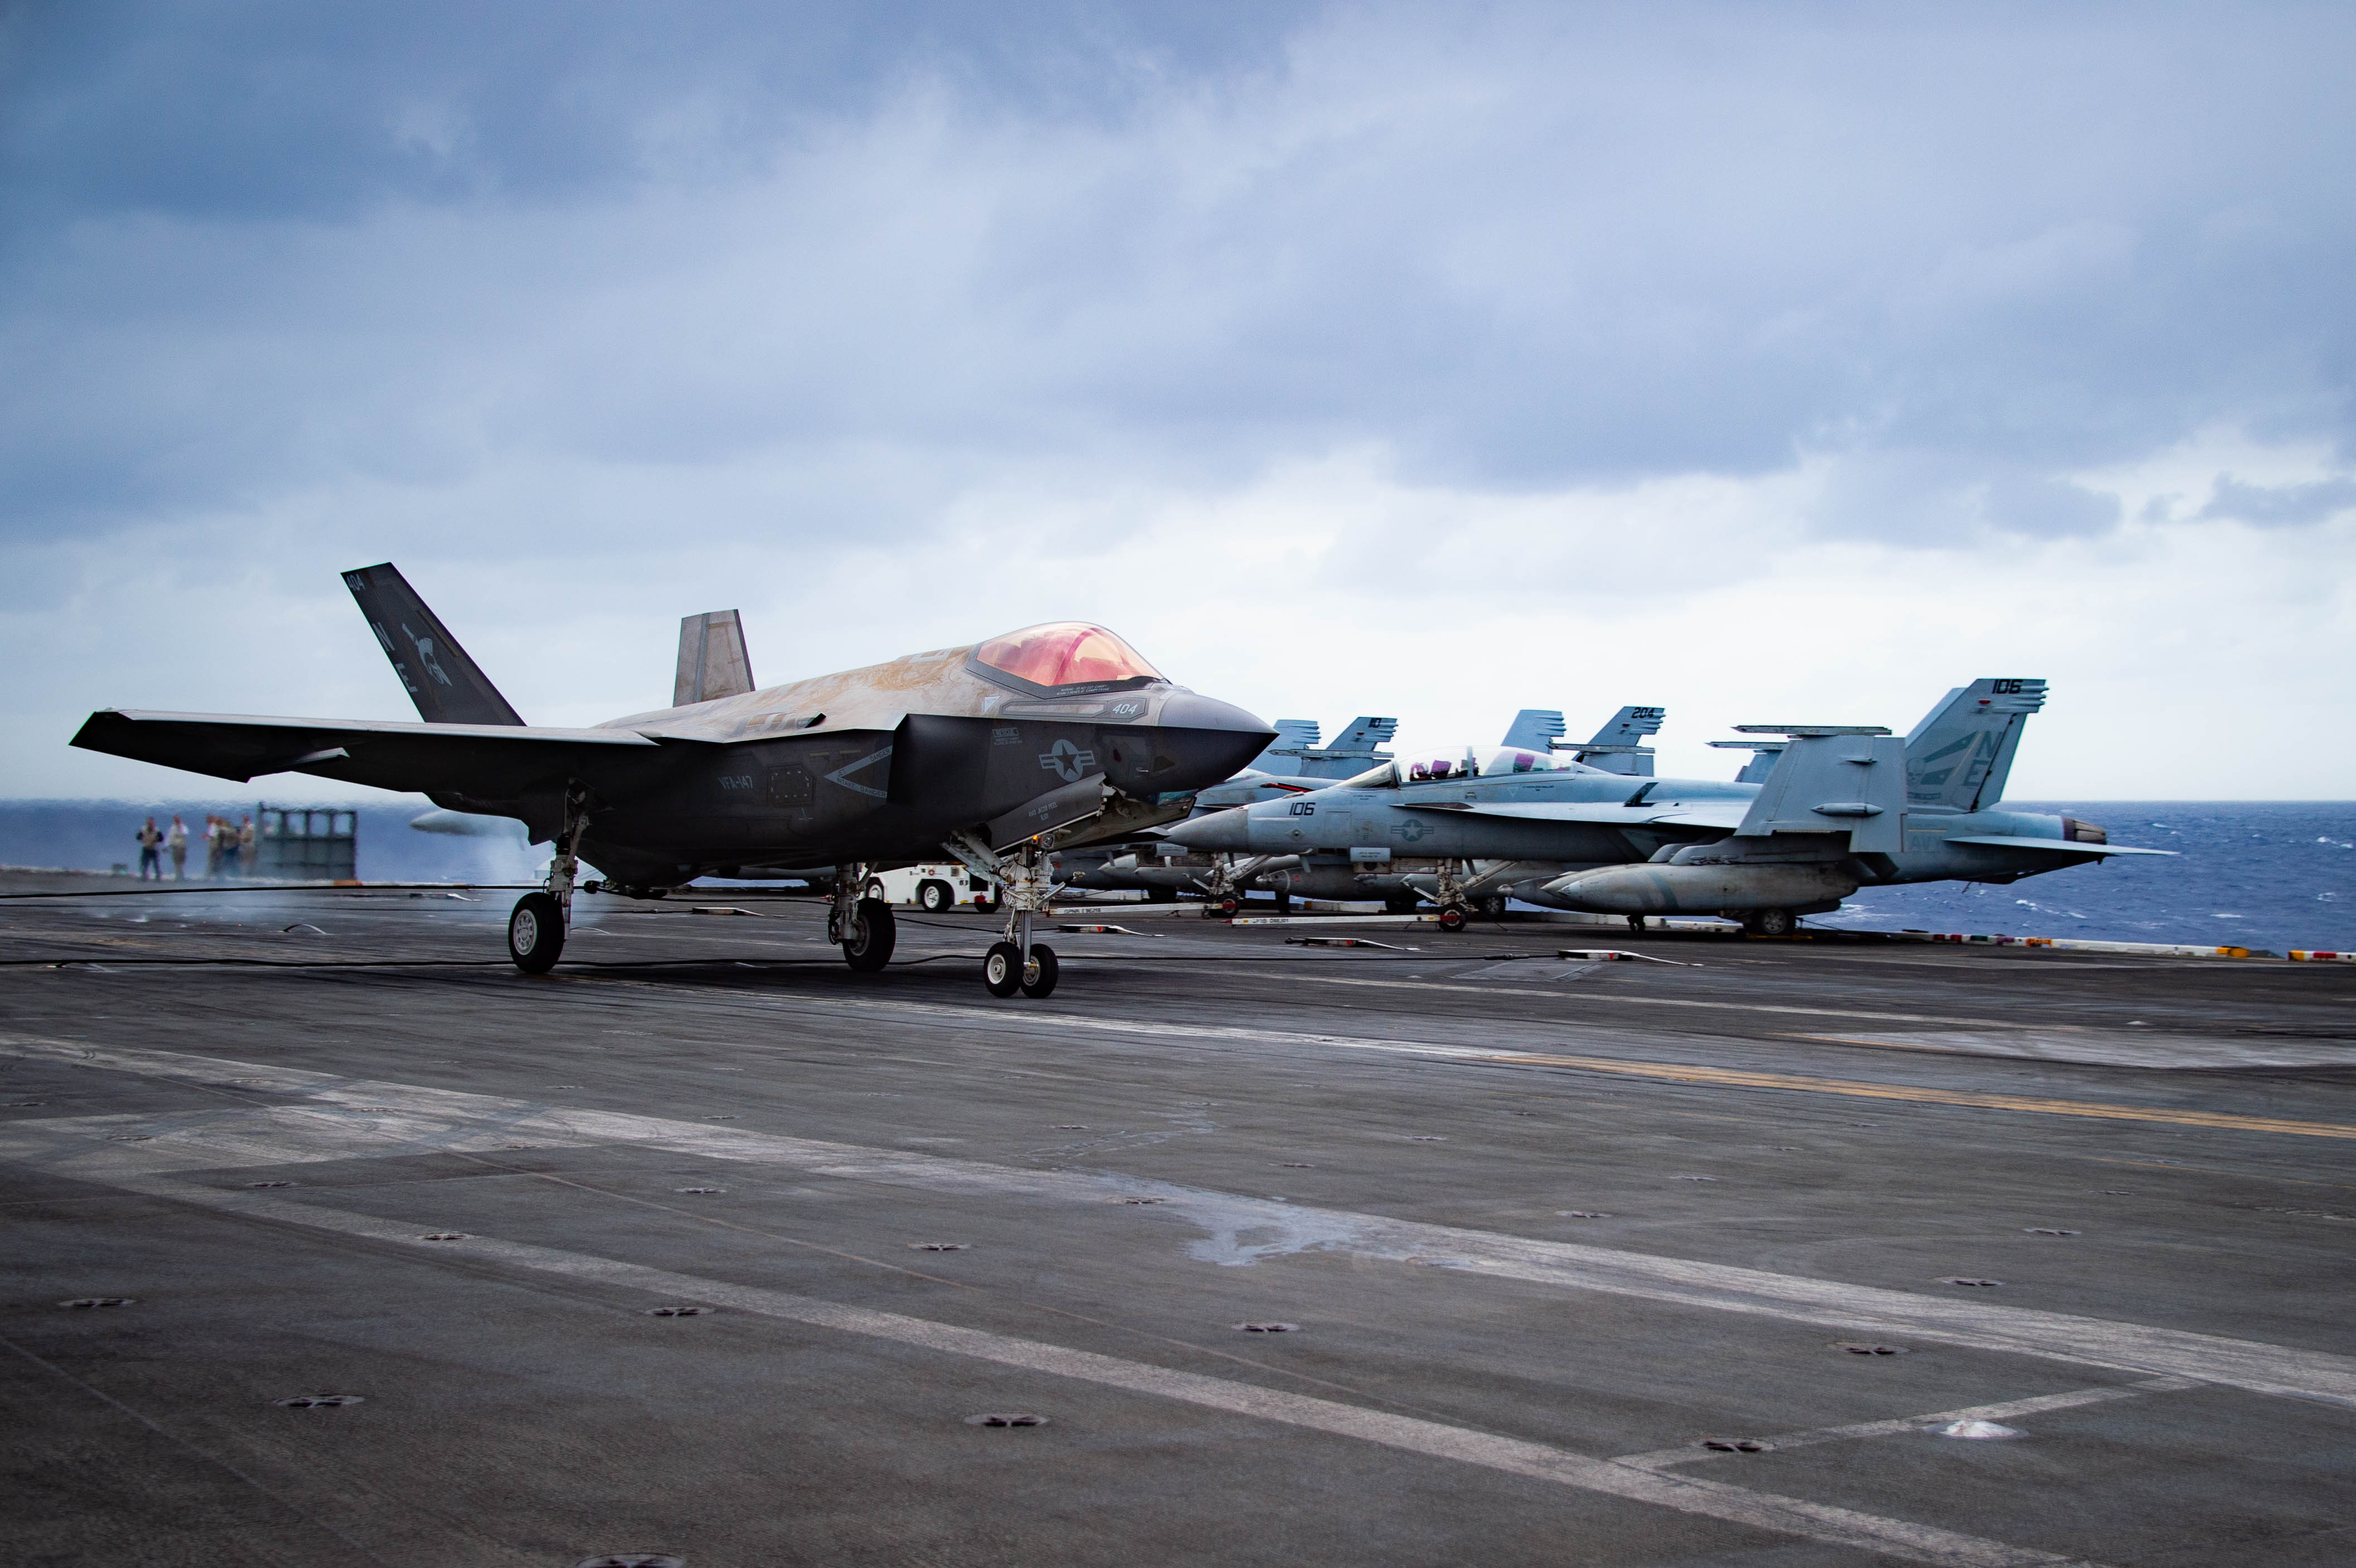 An F-35C Lightning II, assigned to the “Argonauts” of Strike Fighter Squadron (VFA) 147, recovers on the flight deck of Nimitz-class aircraft carrier USS Carl Vinson (CVN 70)